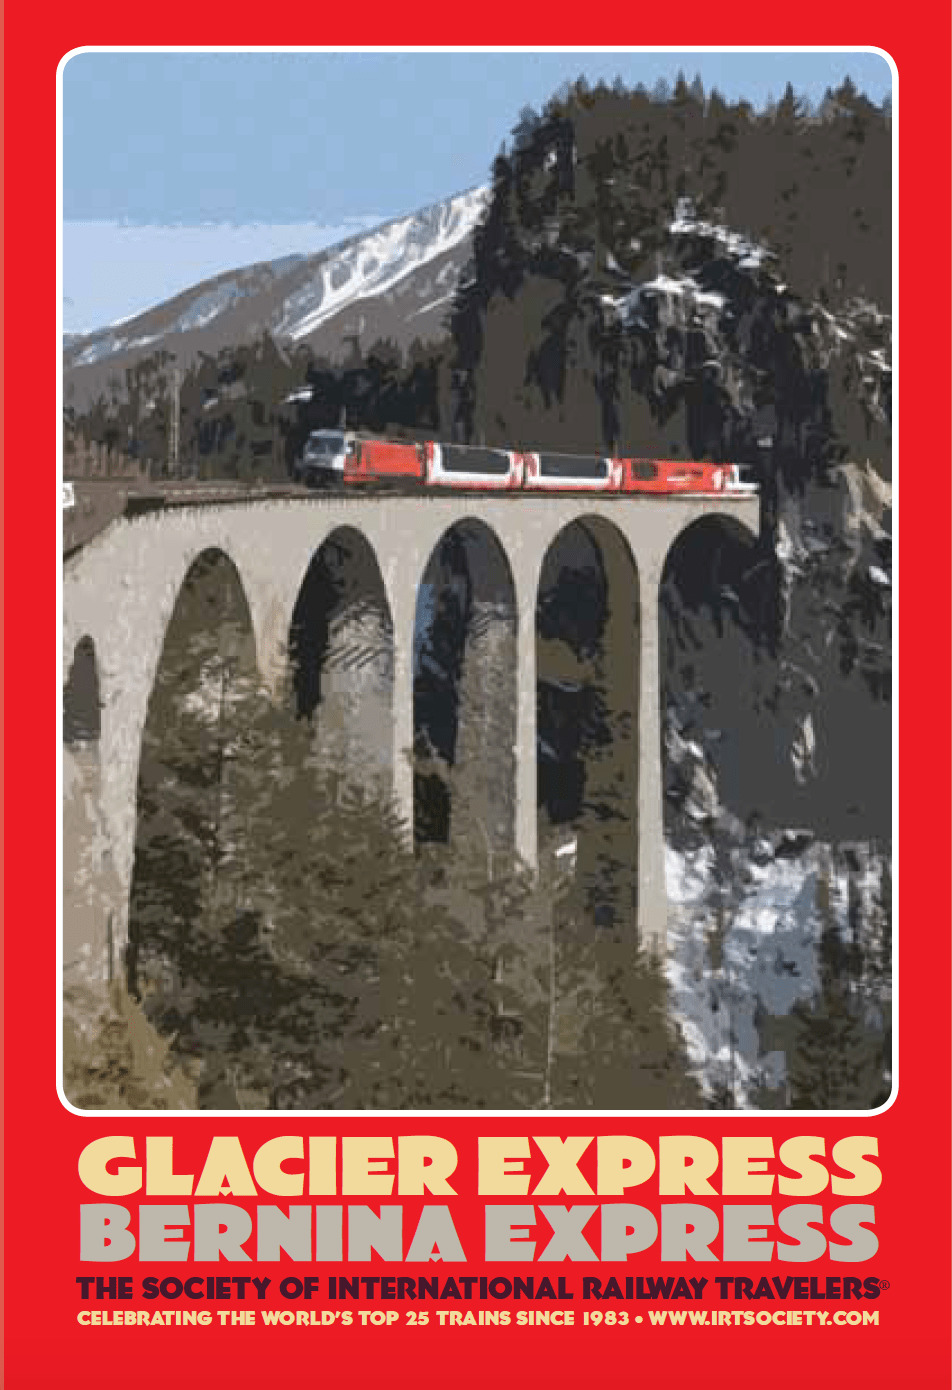 Poster of Switzerland’s famous Glacier Express and Bernina Express